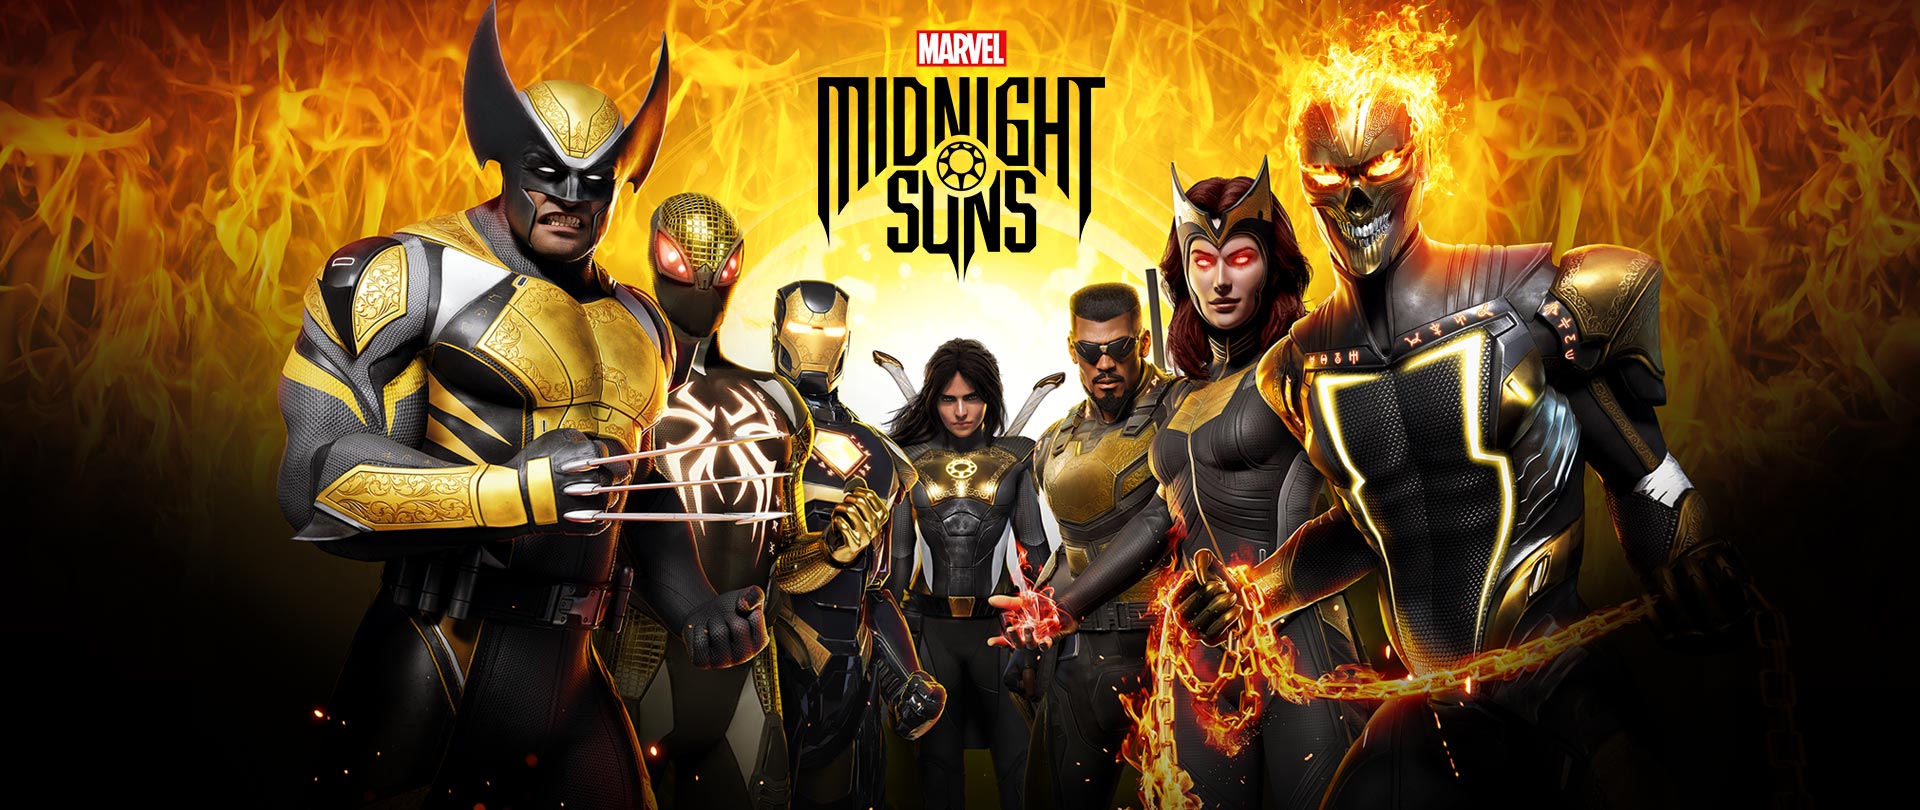 Looking for an edge in the fight? - Marvel's Midnight Suns